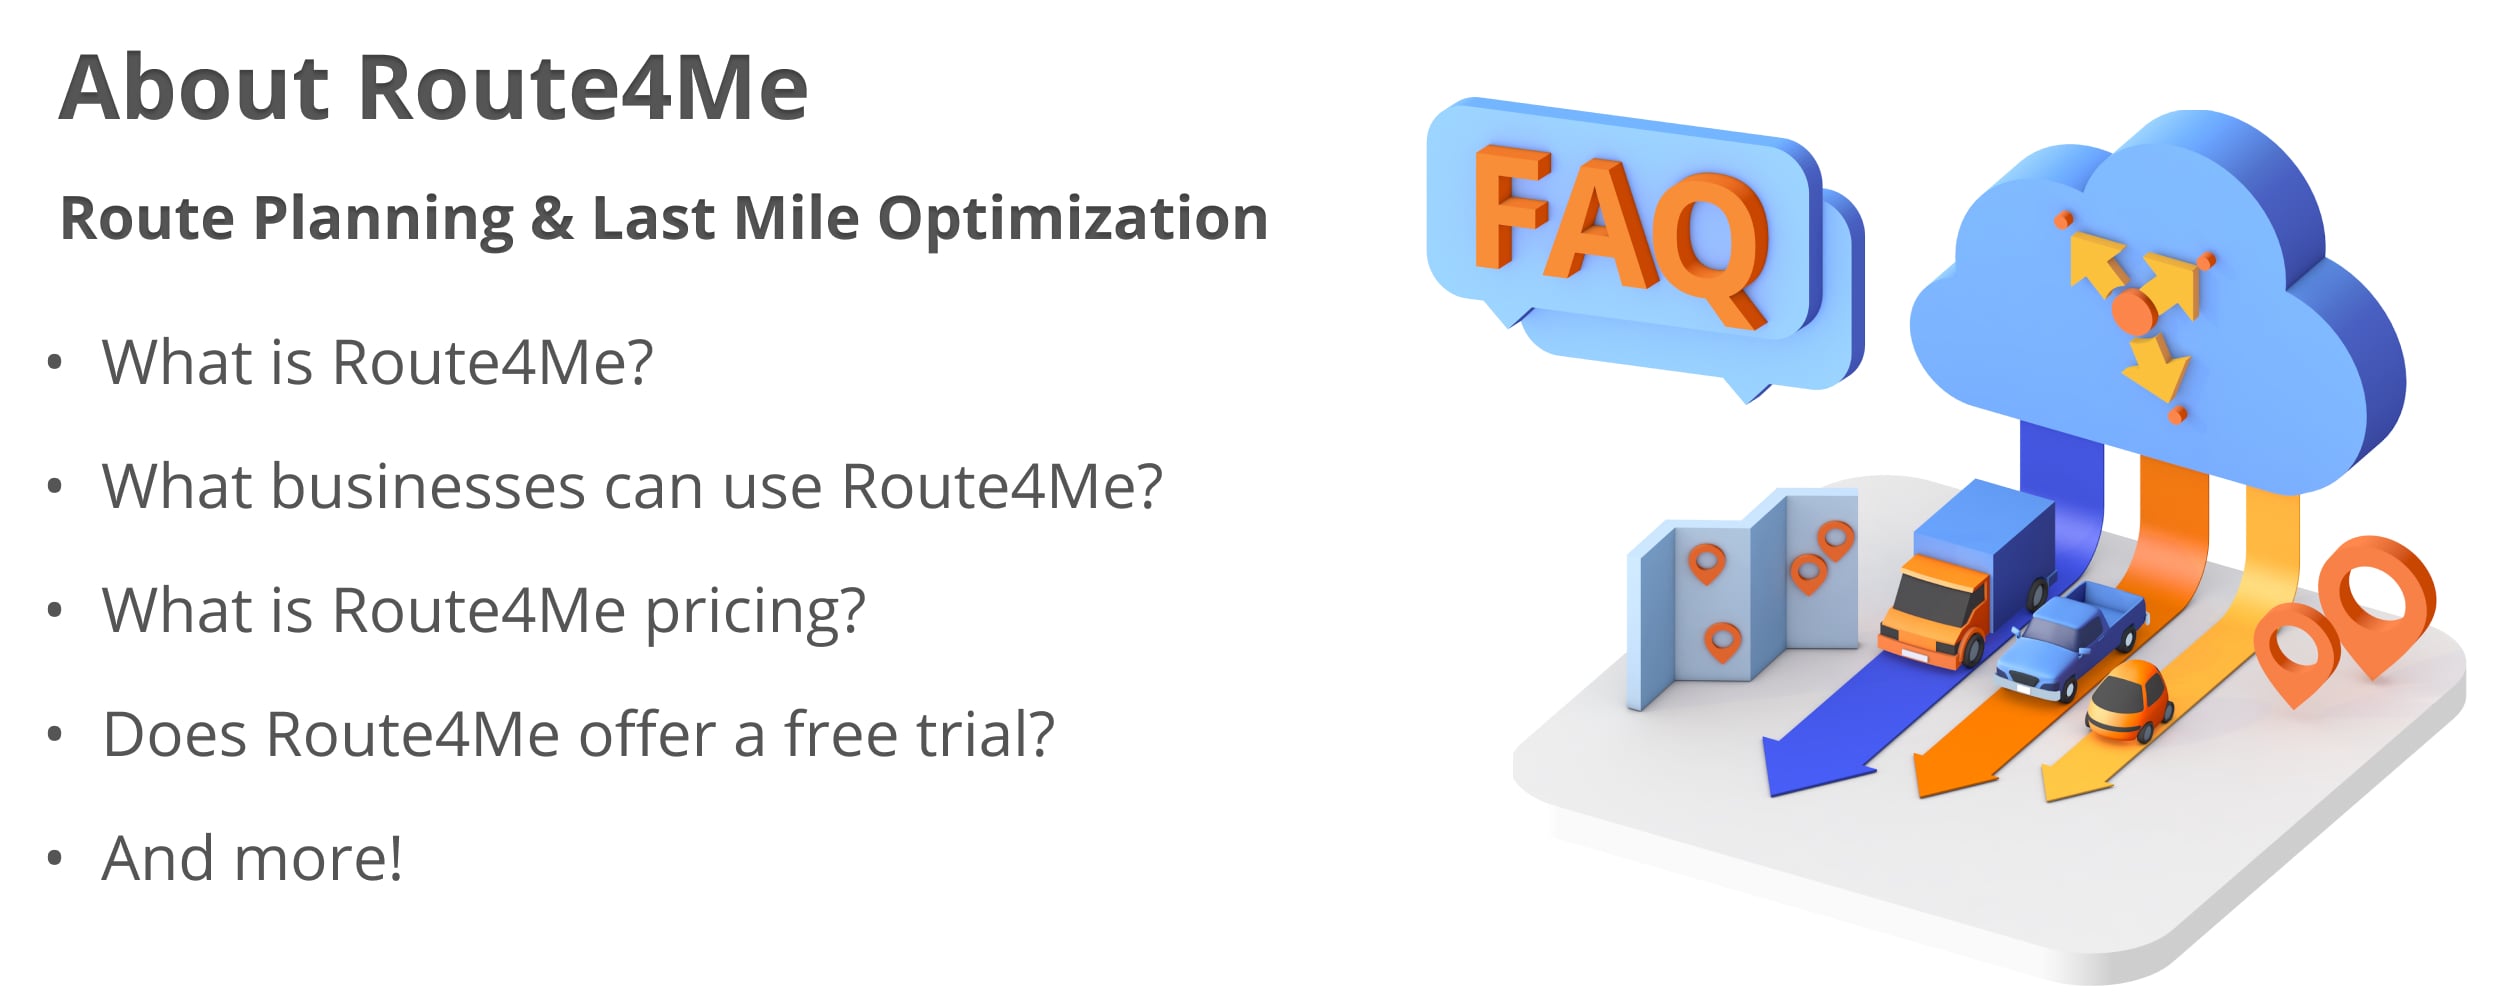 Frequently asked questions about Route4Me route planning and optimization software.